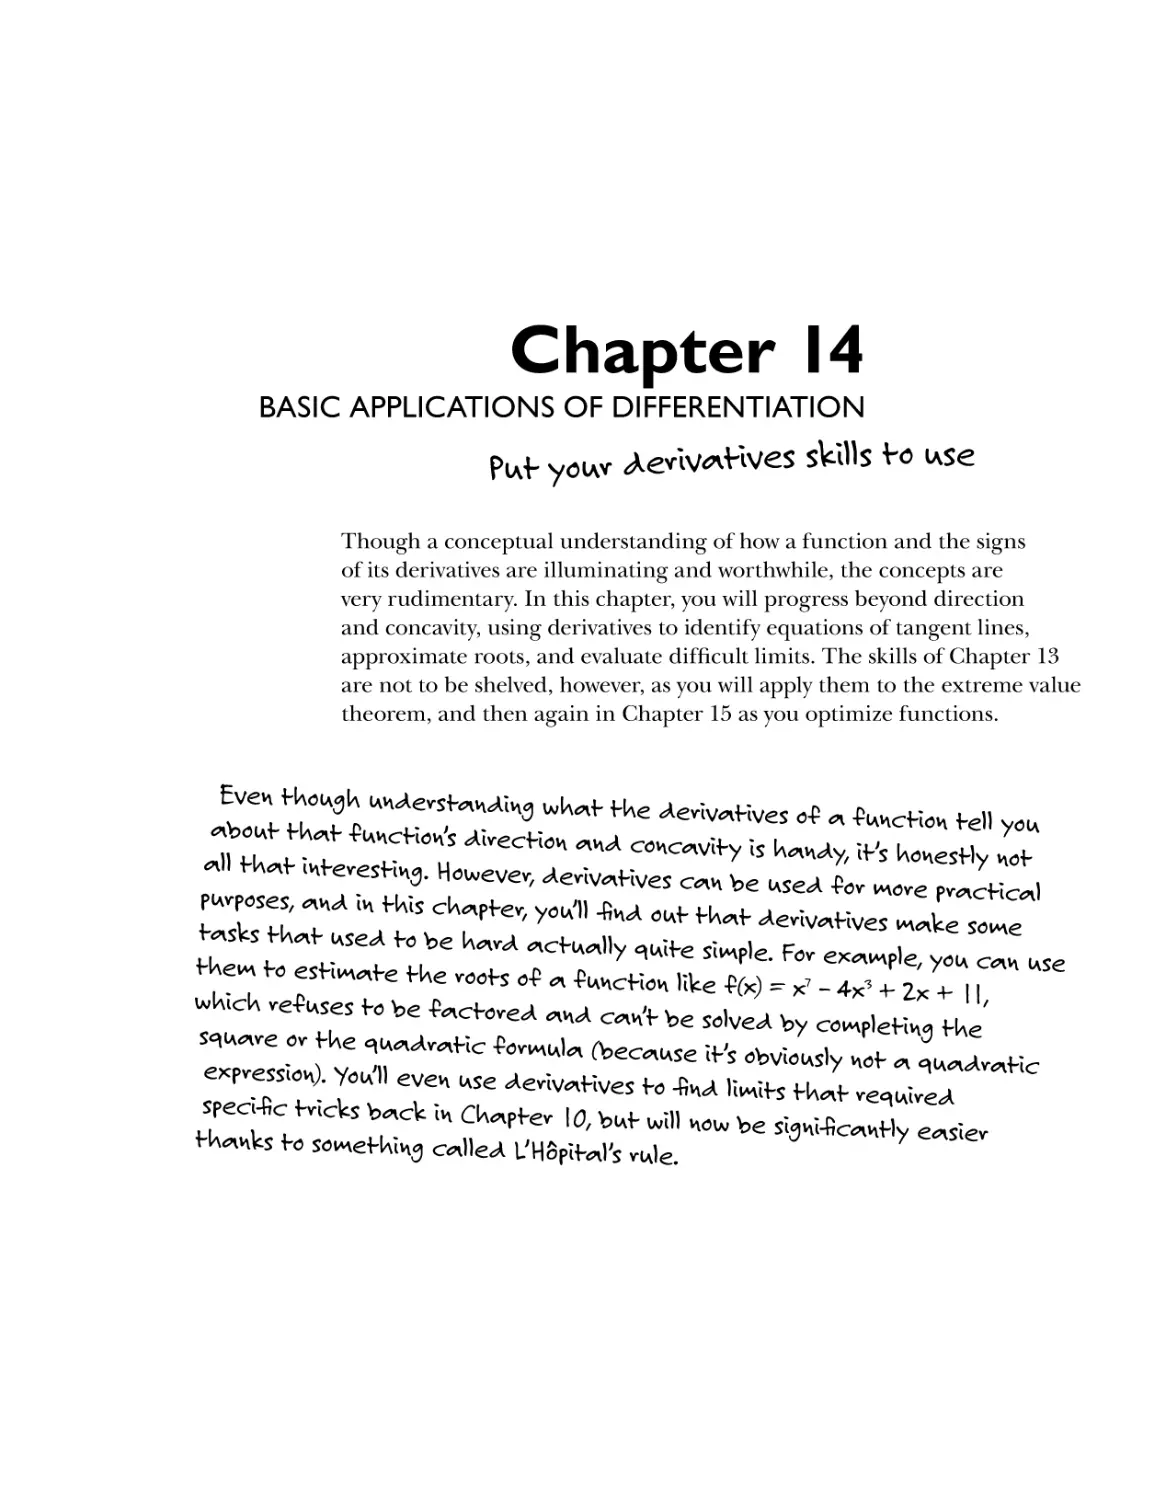 Chapter 14: Basic Applications of Differentiation 205